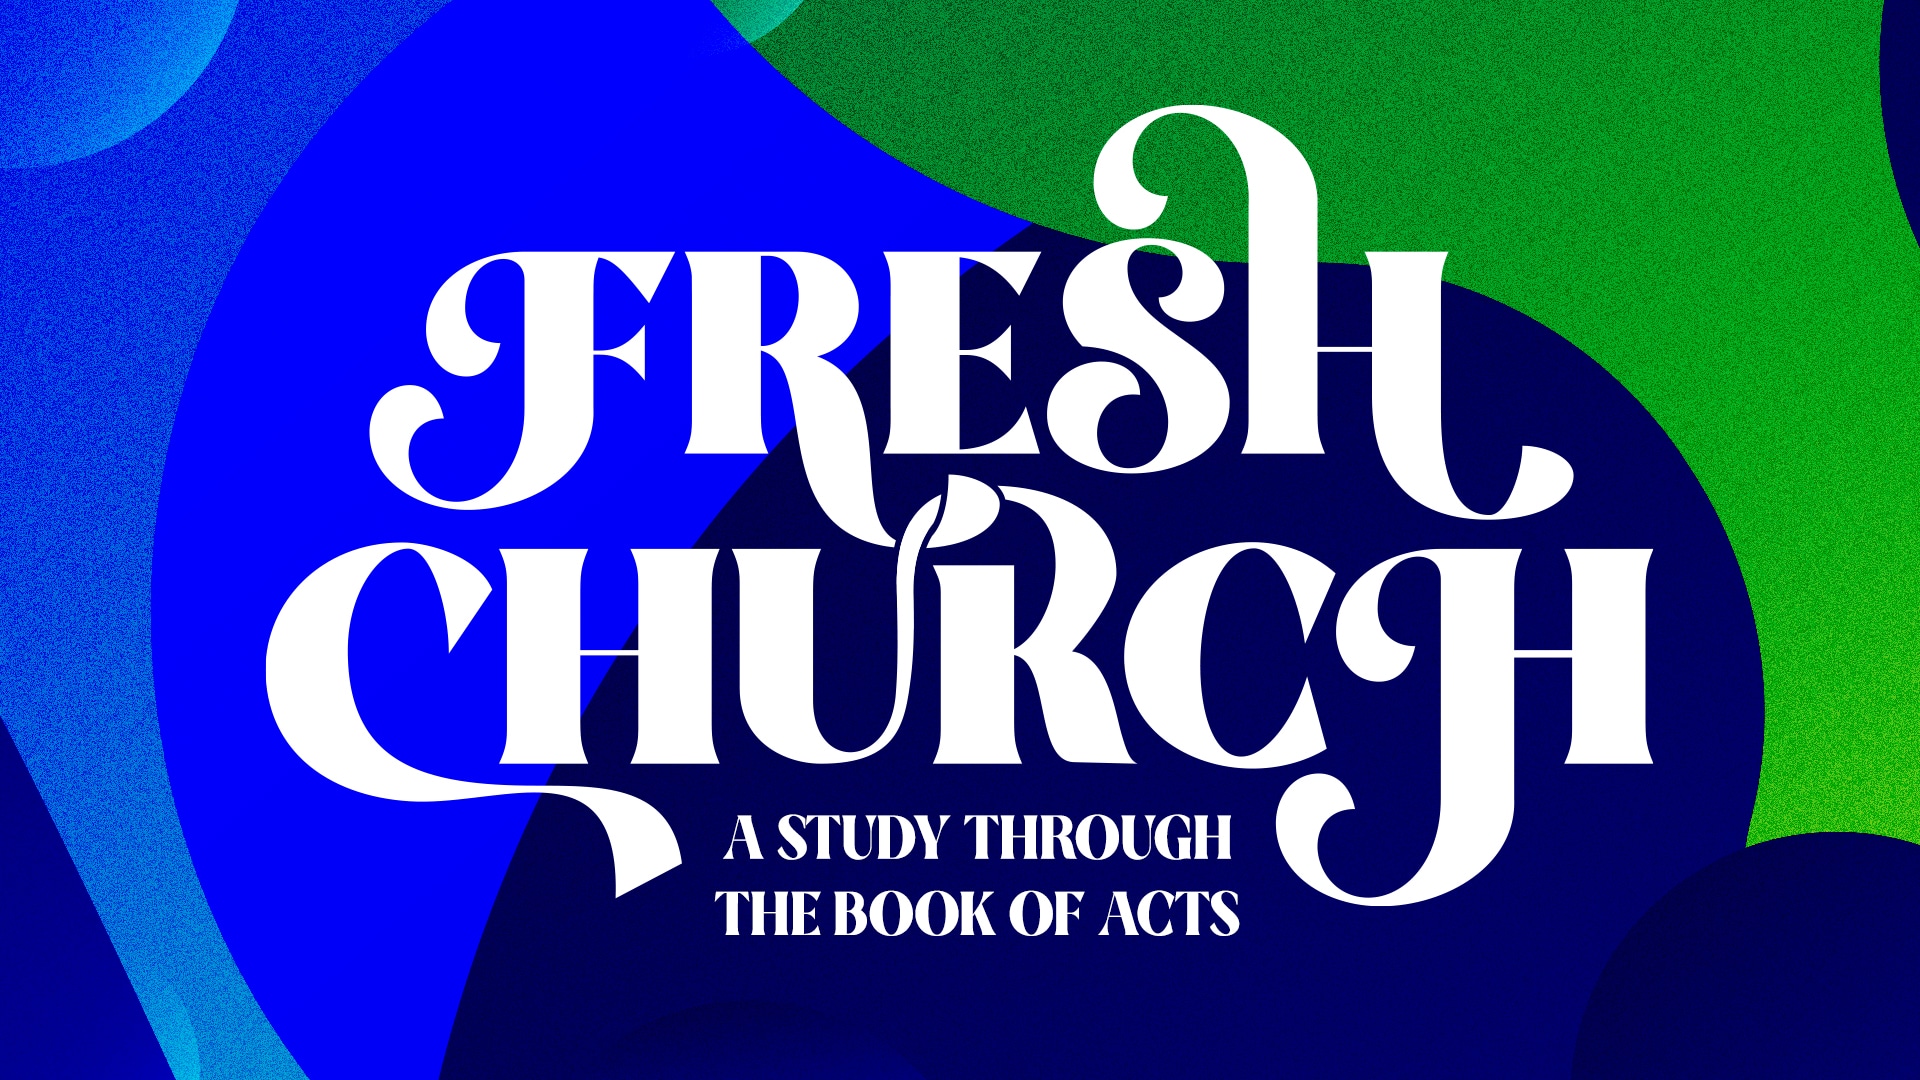 Acts 15: The Jerusalem Council (Fresh Church)